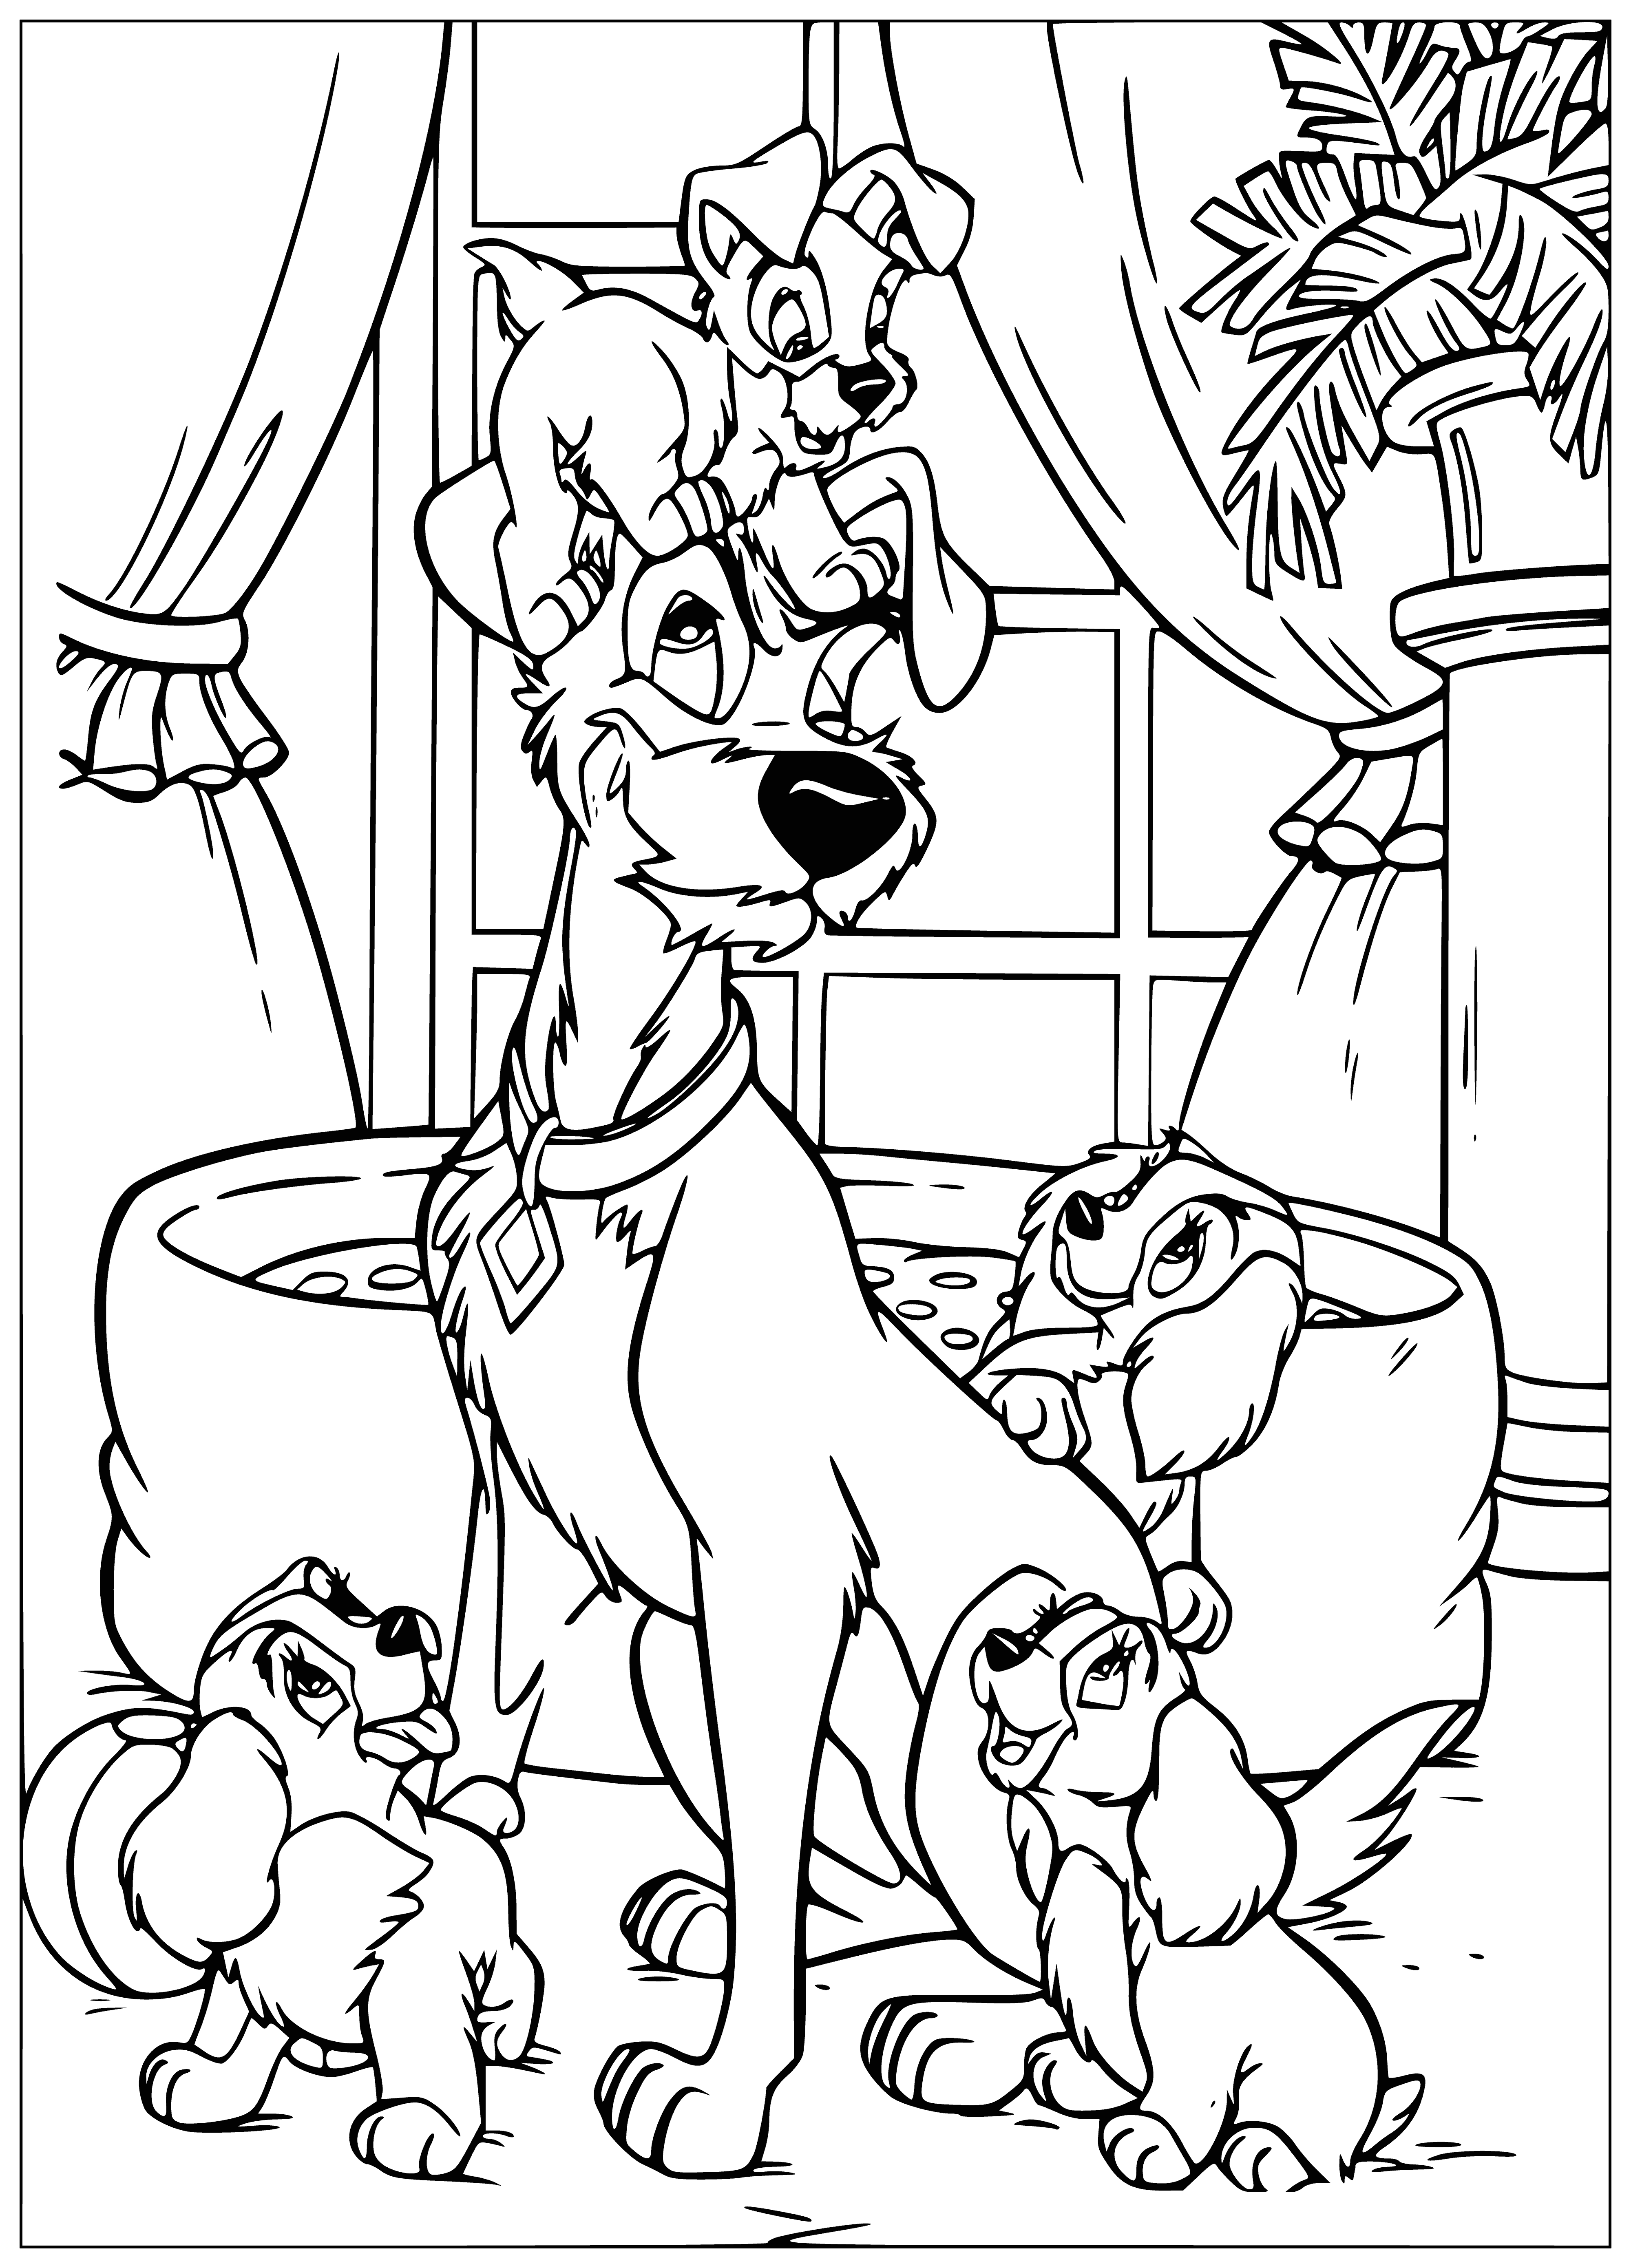 coloring page: Restless puppy chews bone on bed of straw, mom-dog watching with concern.